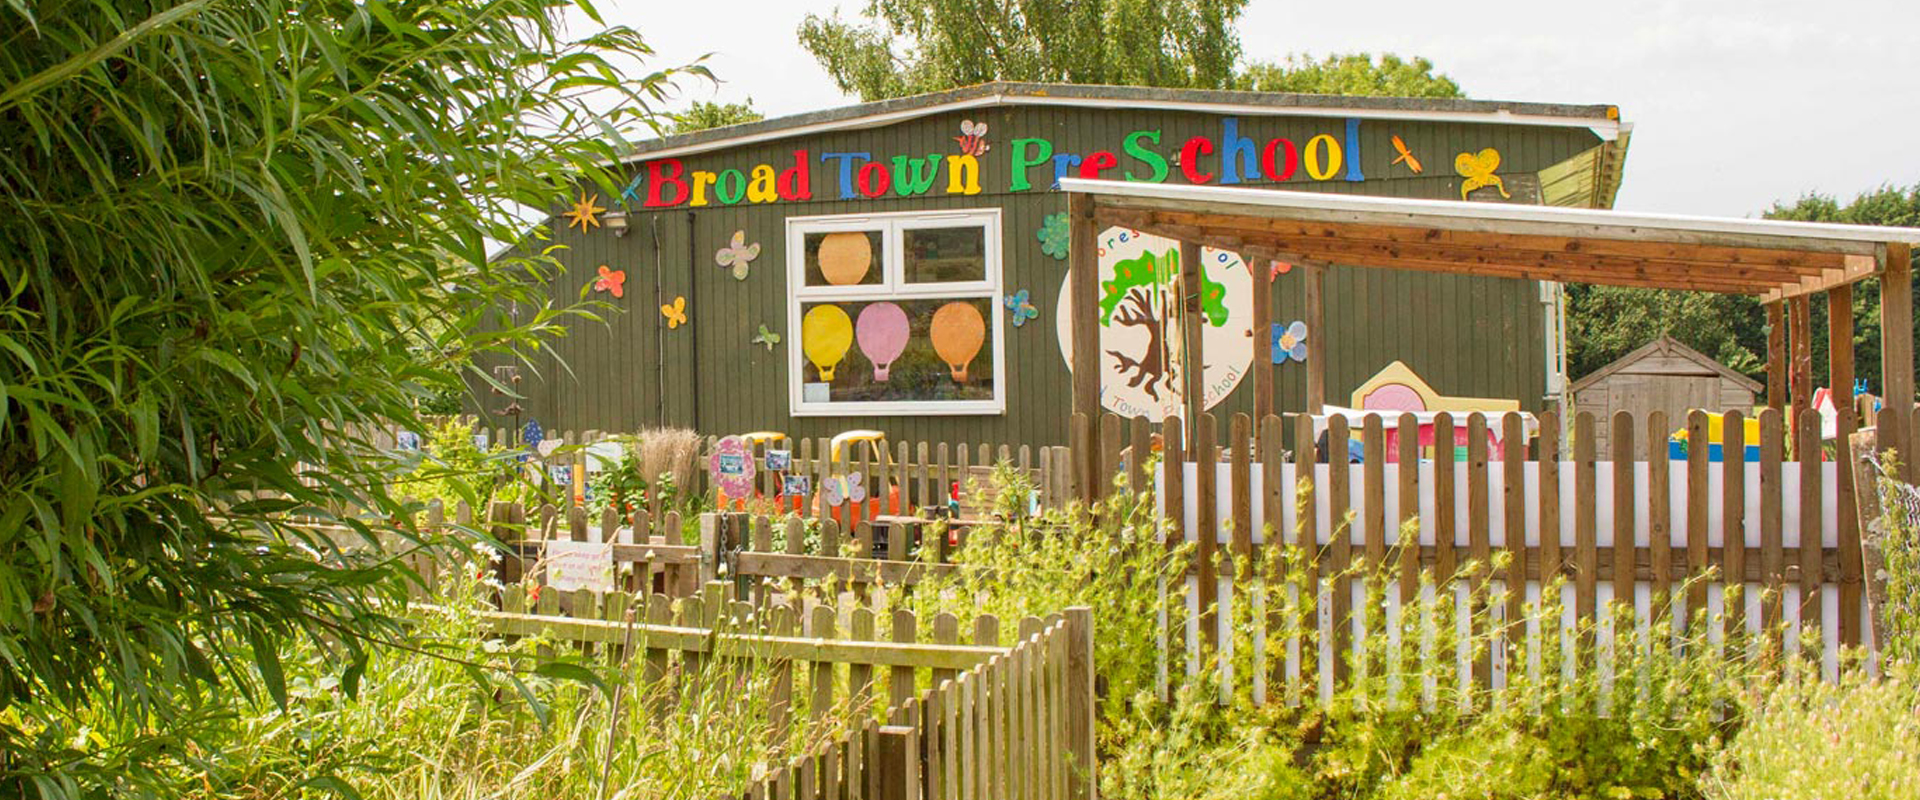 Welcome to Broad Town Pre-School